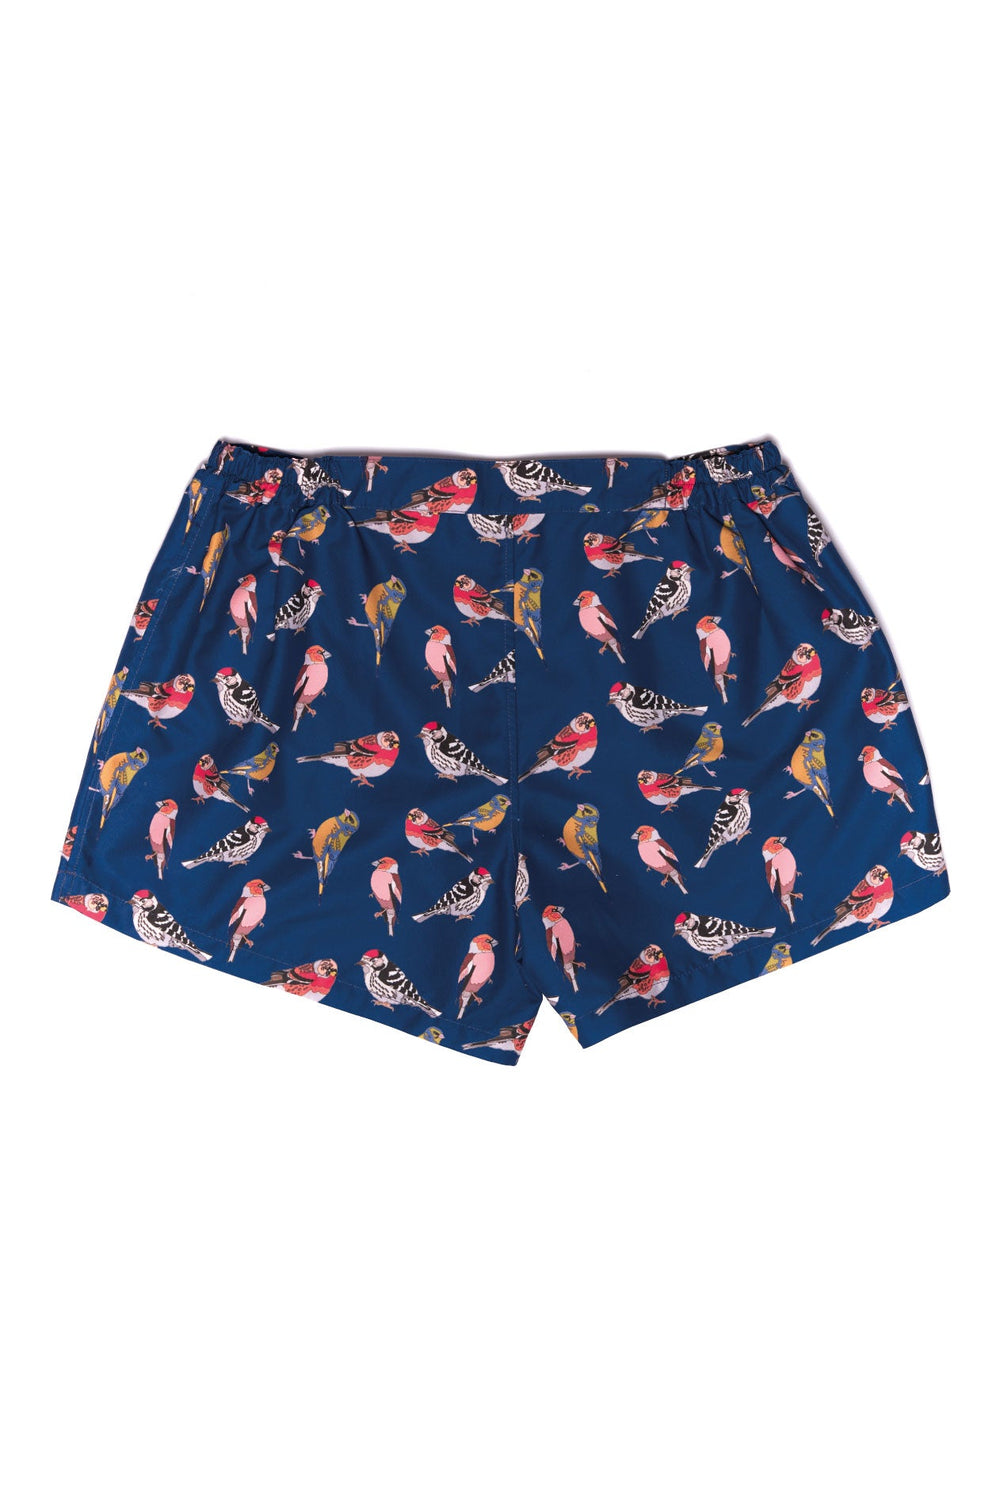 Men's navy blue shorts with colorful bird print